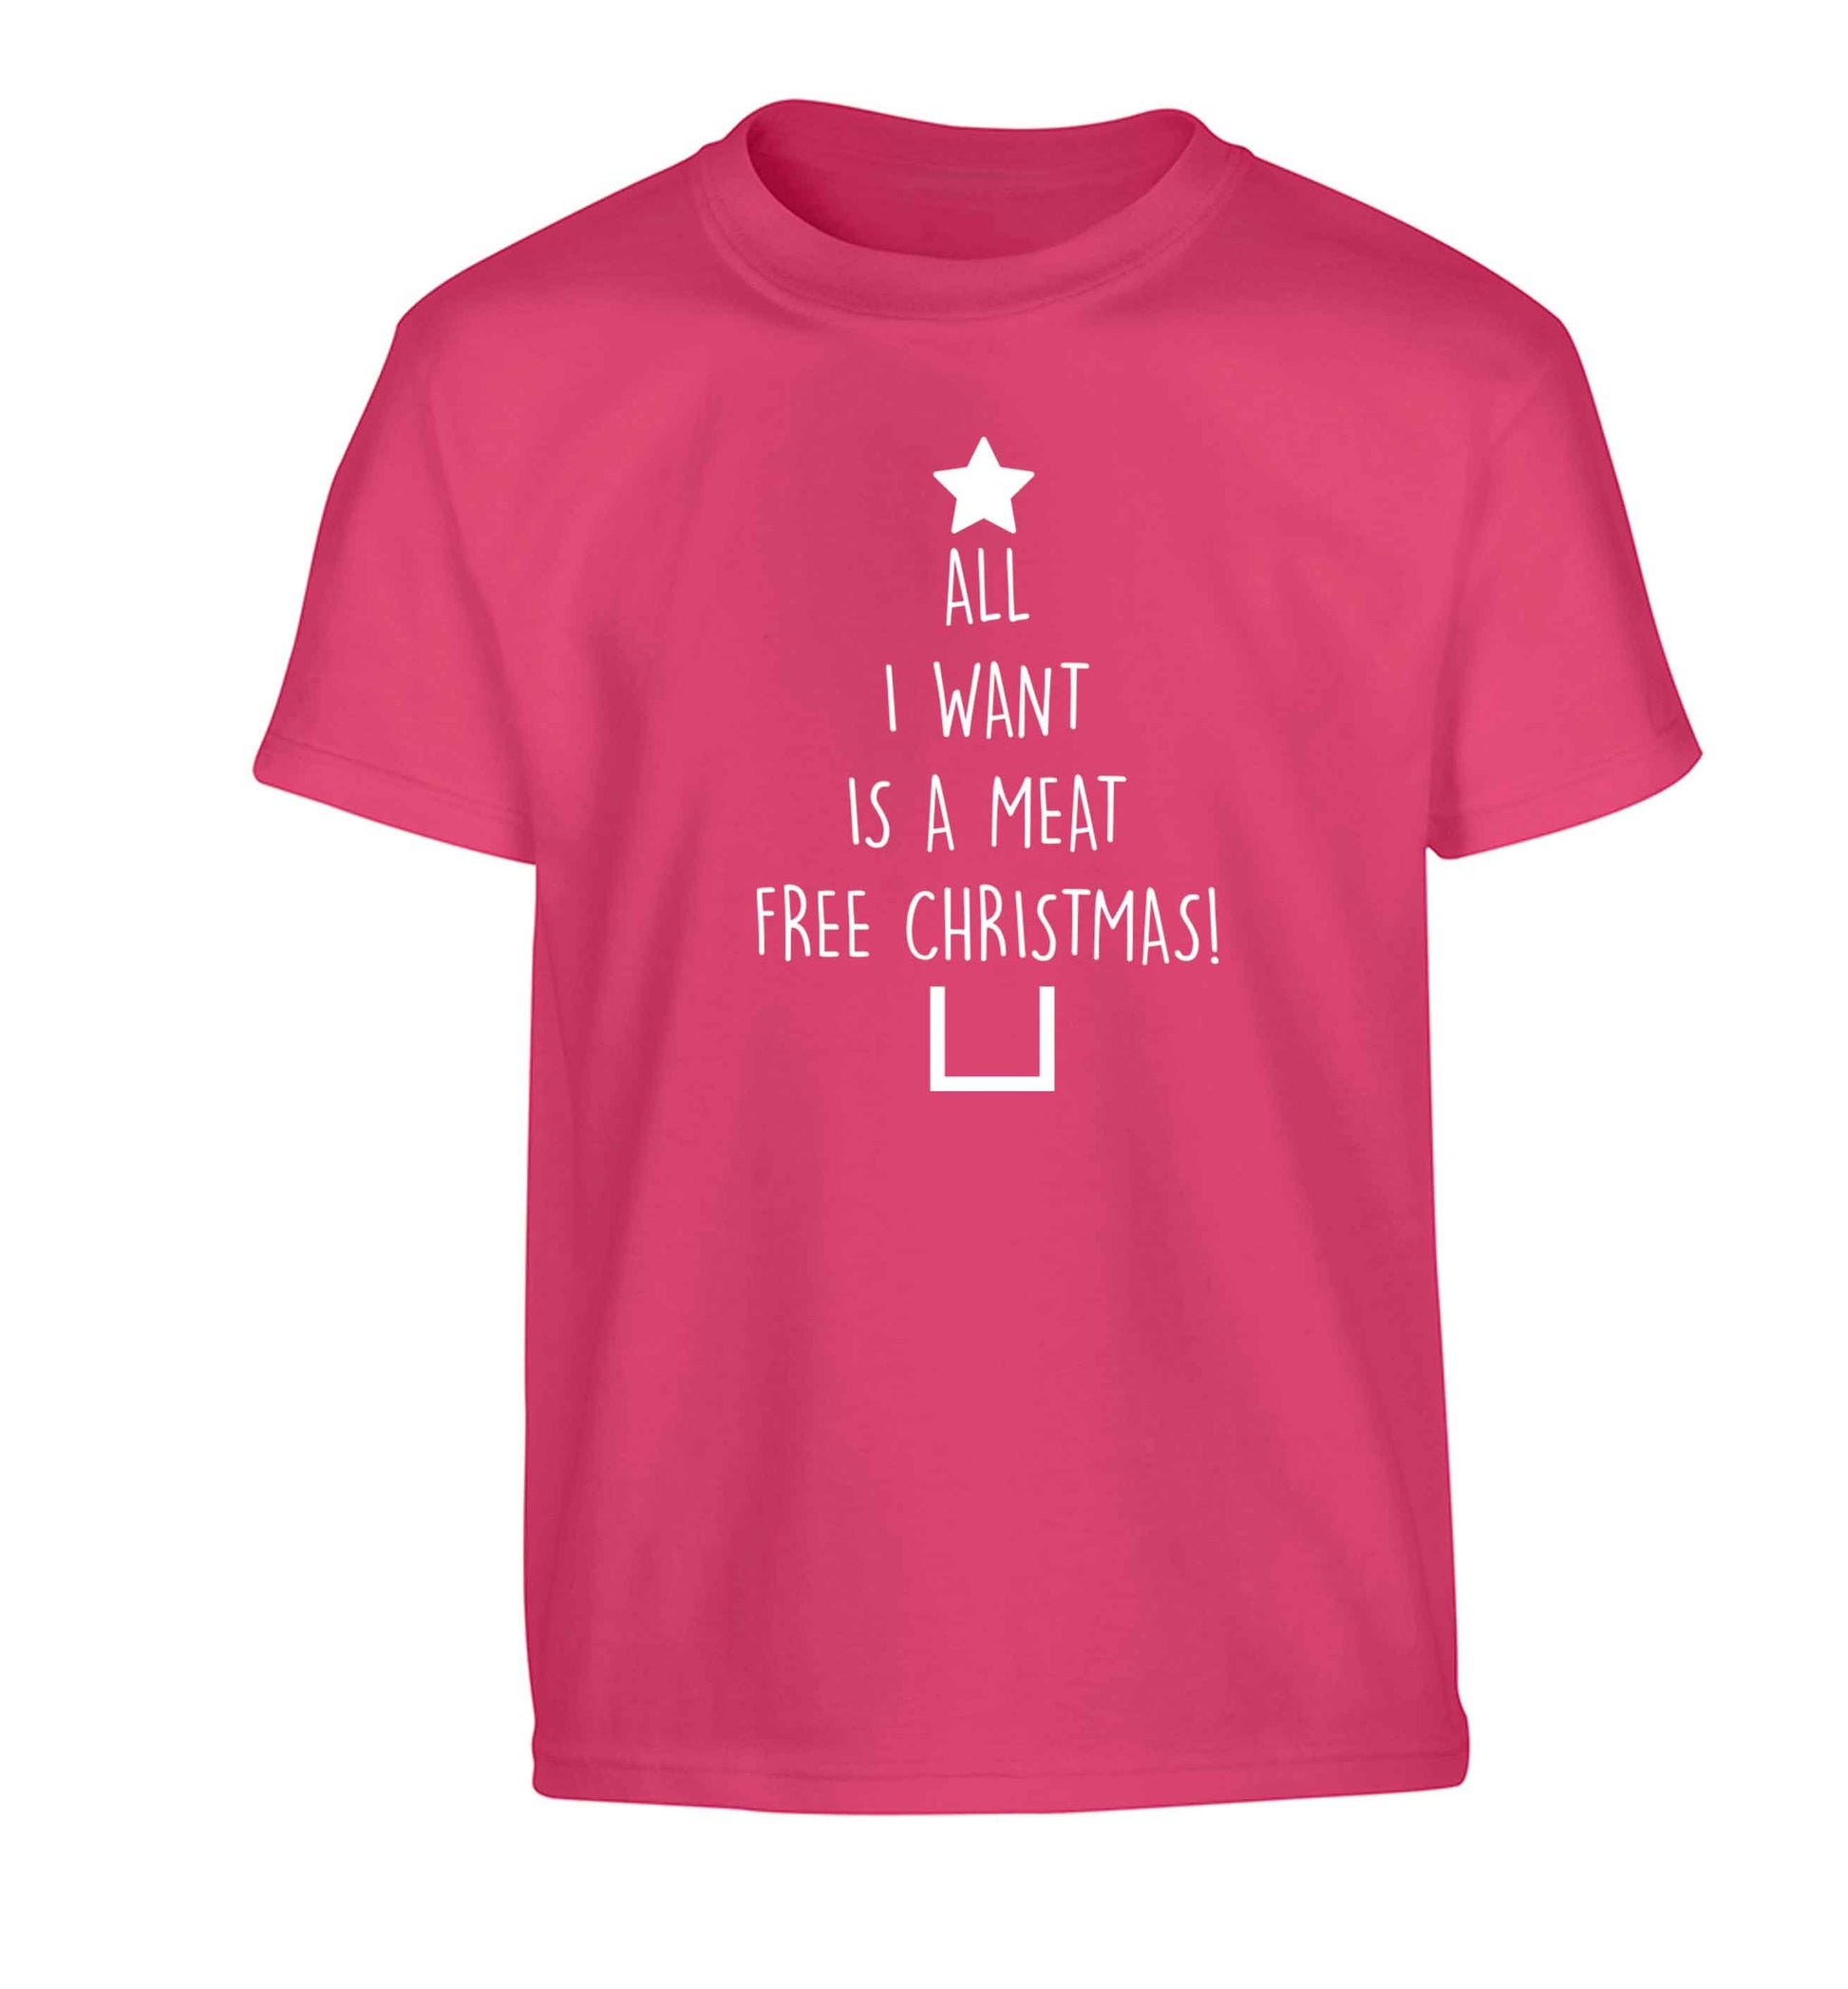 All I want is a meat free Christmas Children's pink Tshirt 12-13 Years